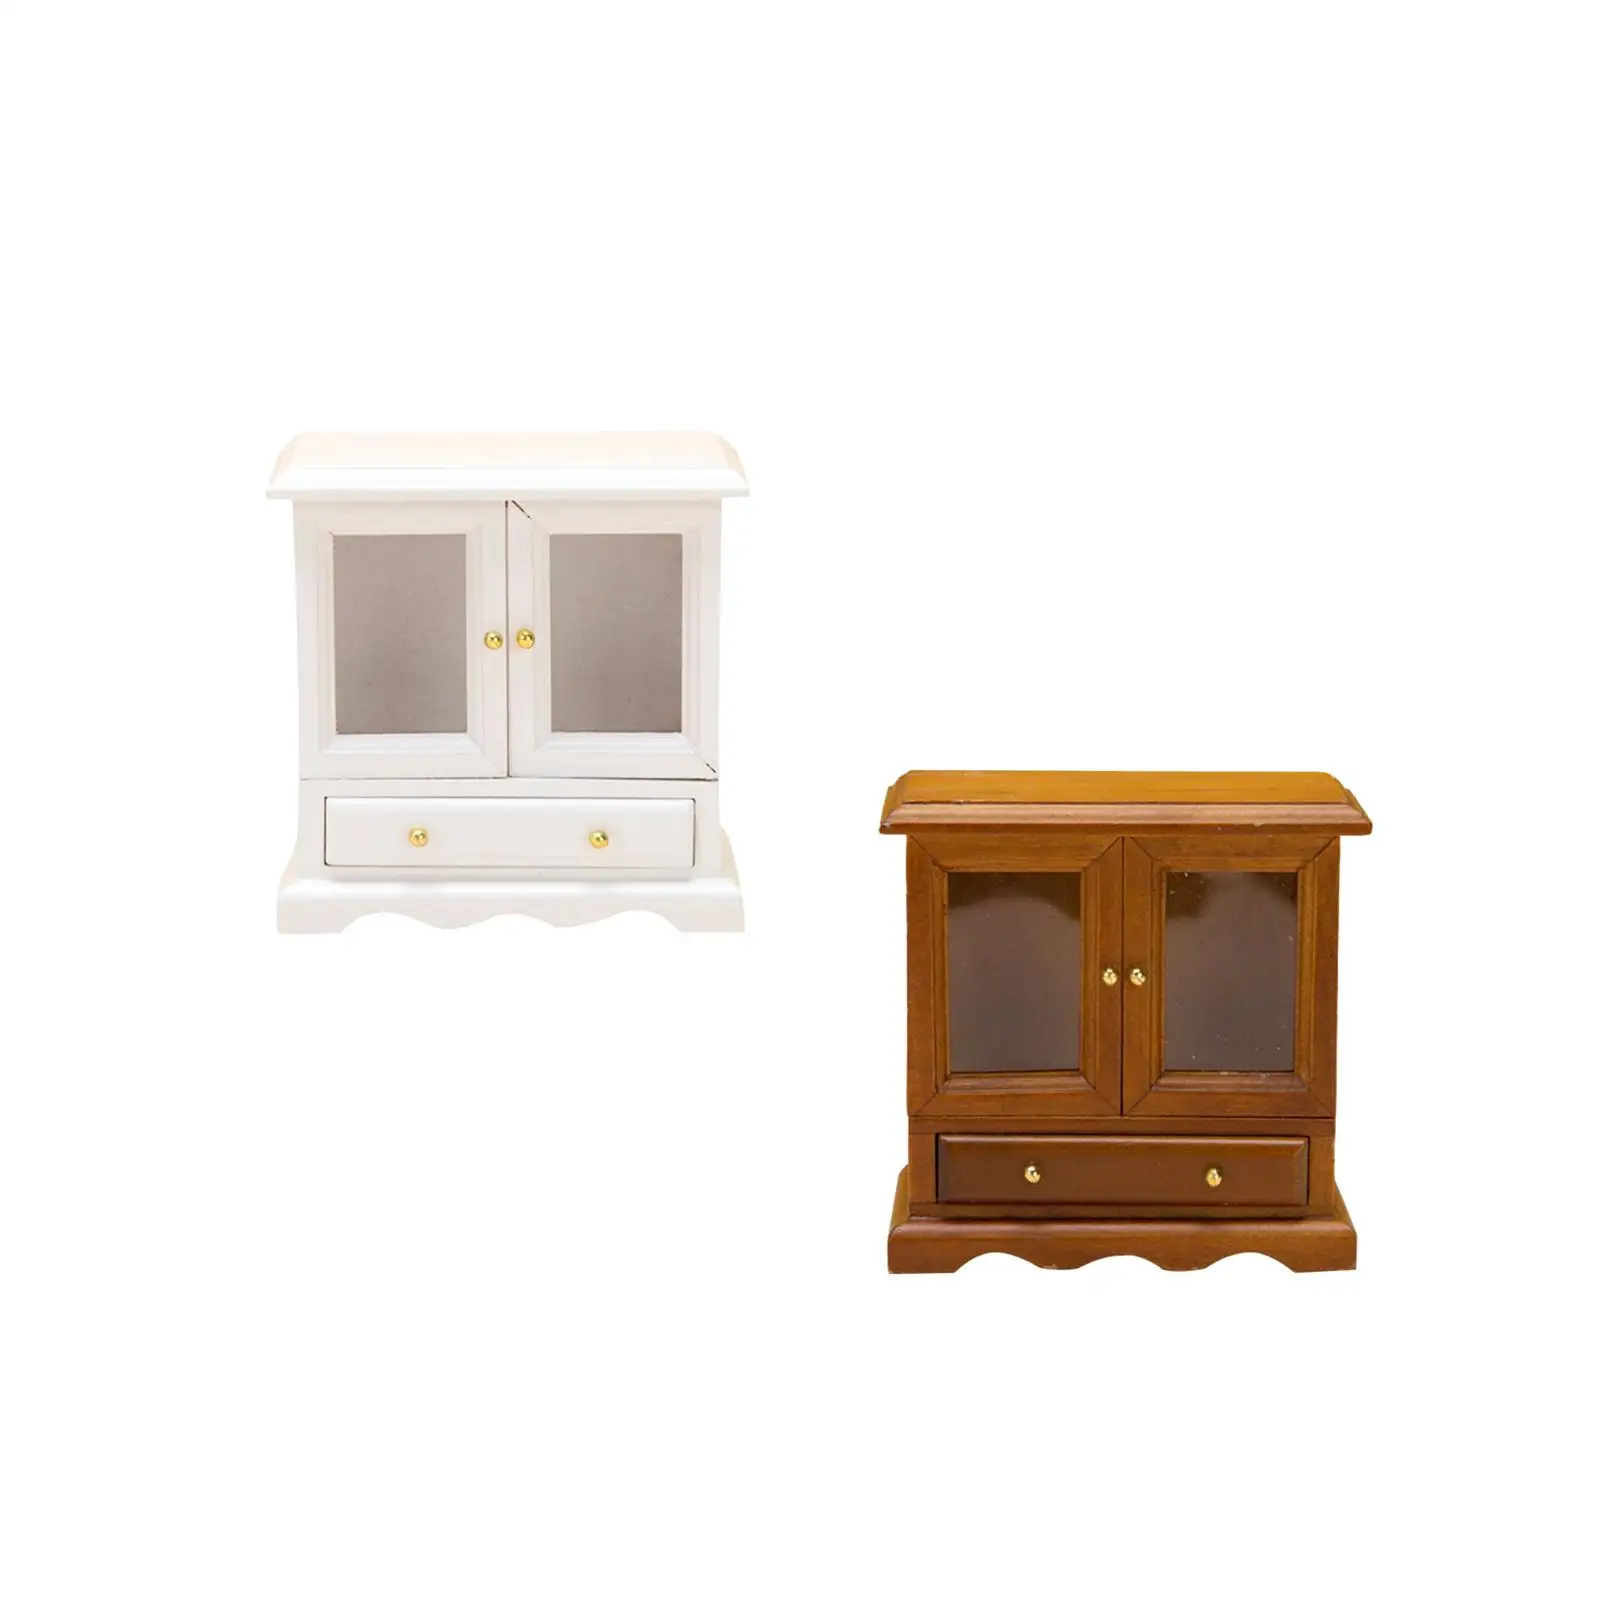 1:12 Scale Doll House Kitchen Sideboard Floor Cabinet Miniature Wooden Model Doll House Accessories for Kitchen Measure 3x3inch